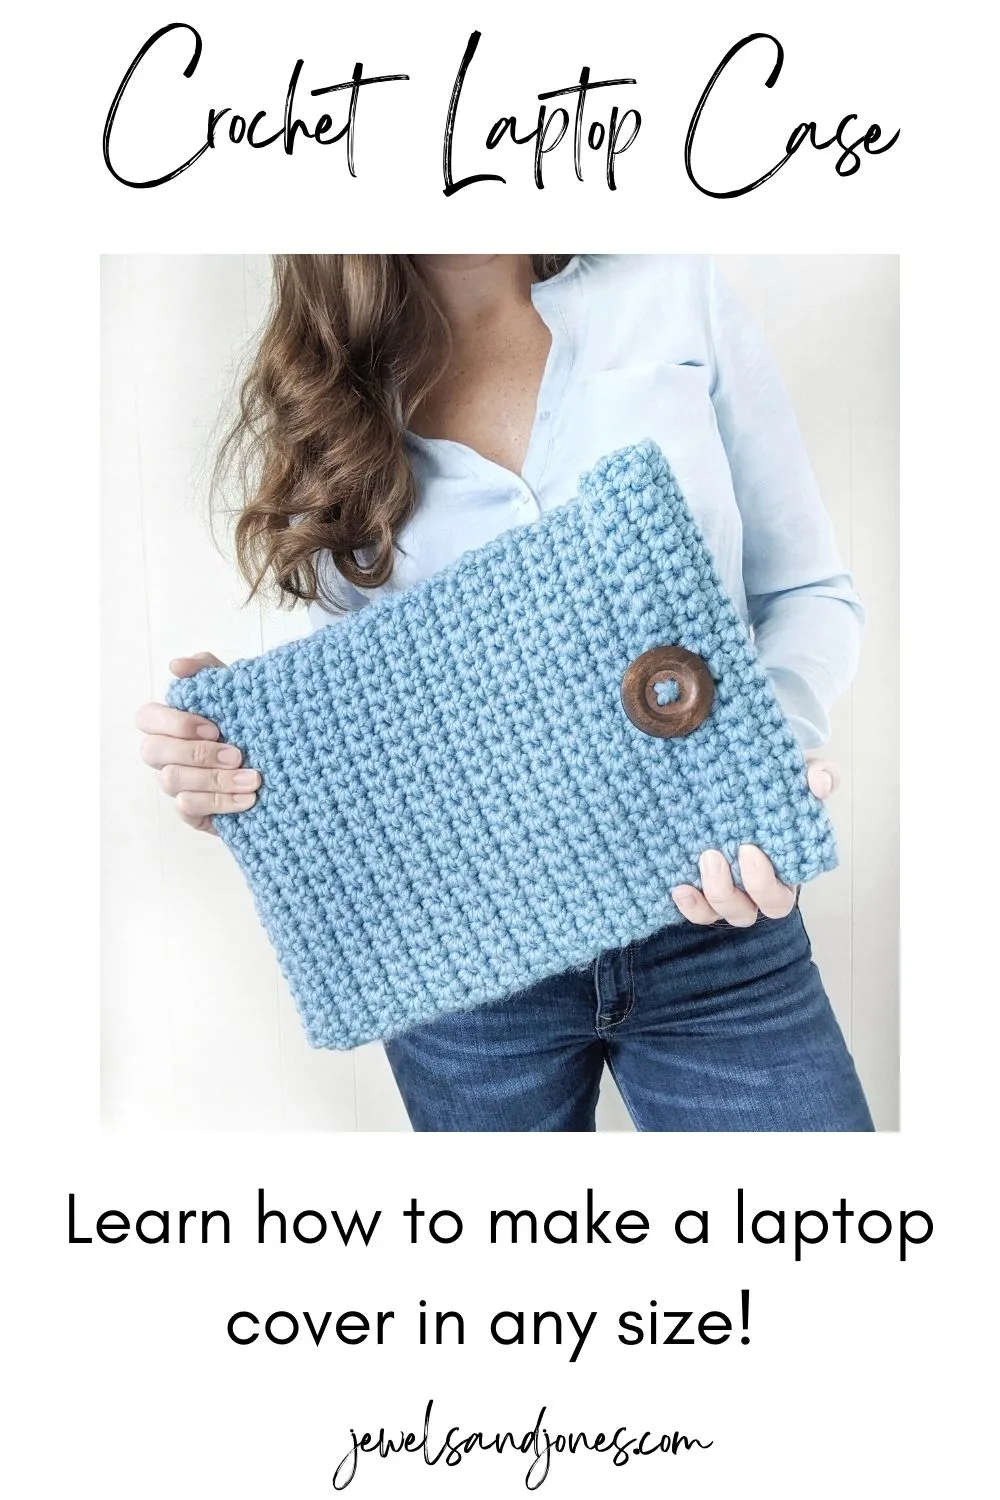 Learn how to crochet a laptop in any size